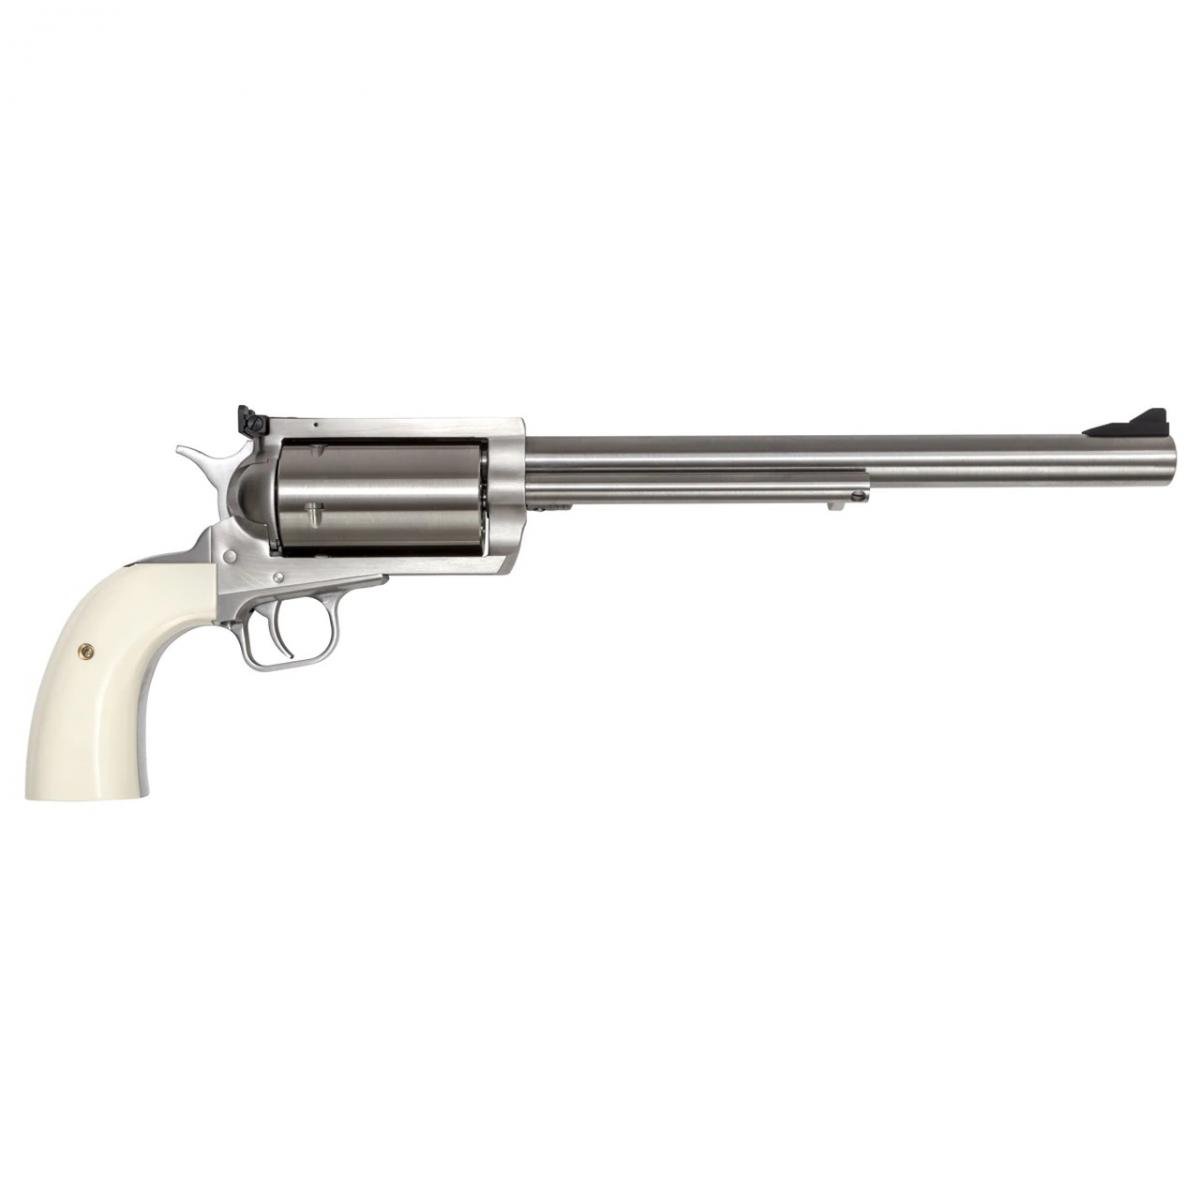 Magnum Research BFR Revolver 500 S&W